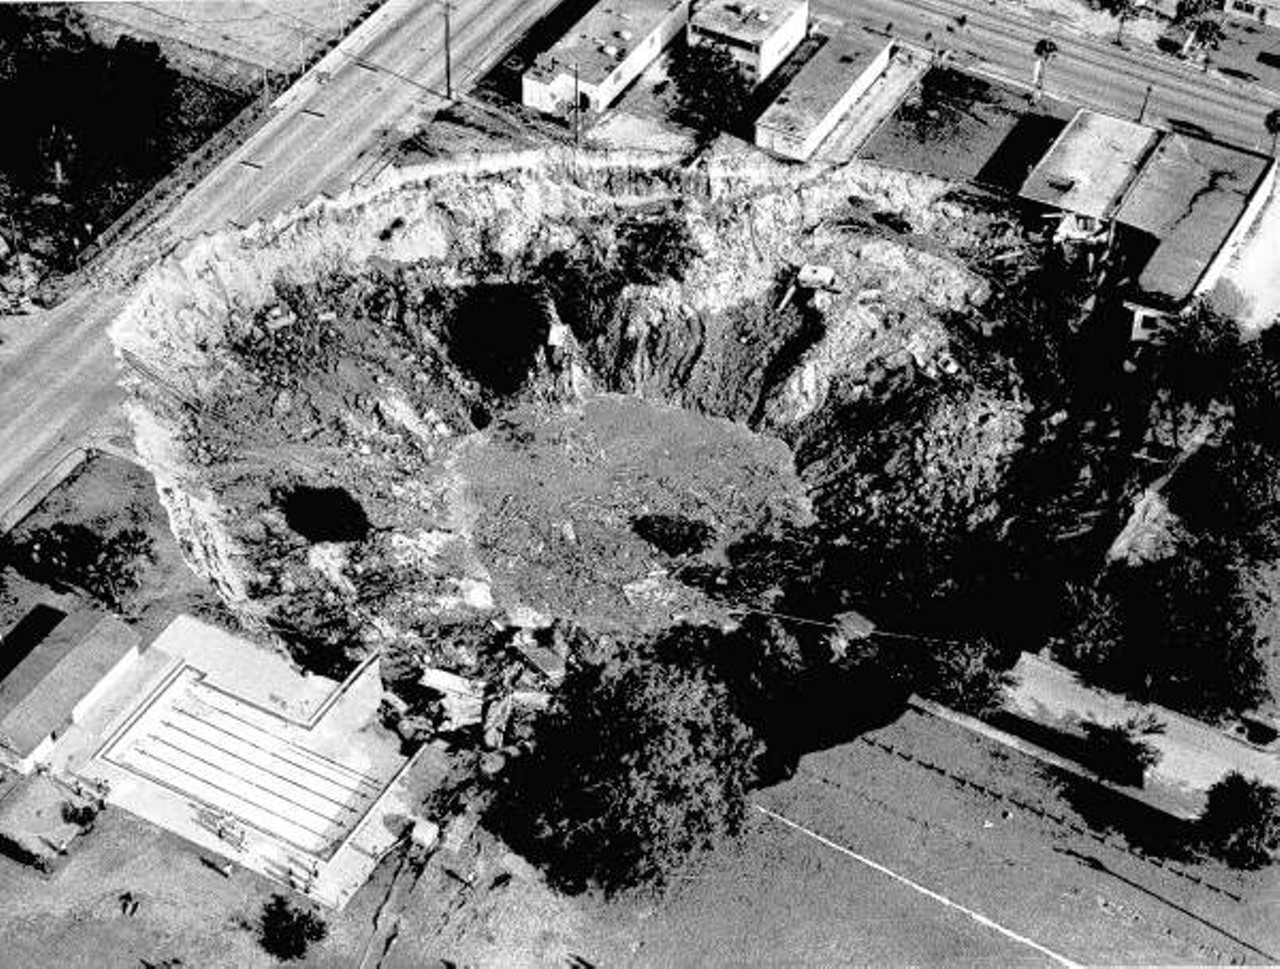 A sinkhole swallowed an entire block of Winter Park, including cars on a car lot and a house, in 1981. Now, the area is just a small lake located west of Denning Drive and north of Fairbanks Avenue.
Photo via Florida Memory